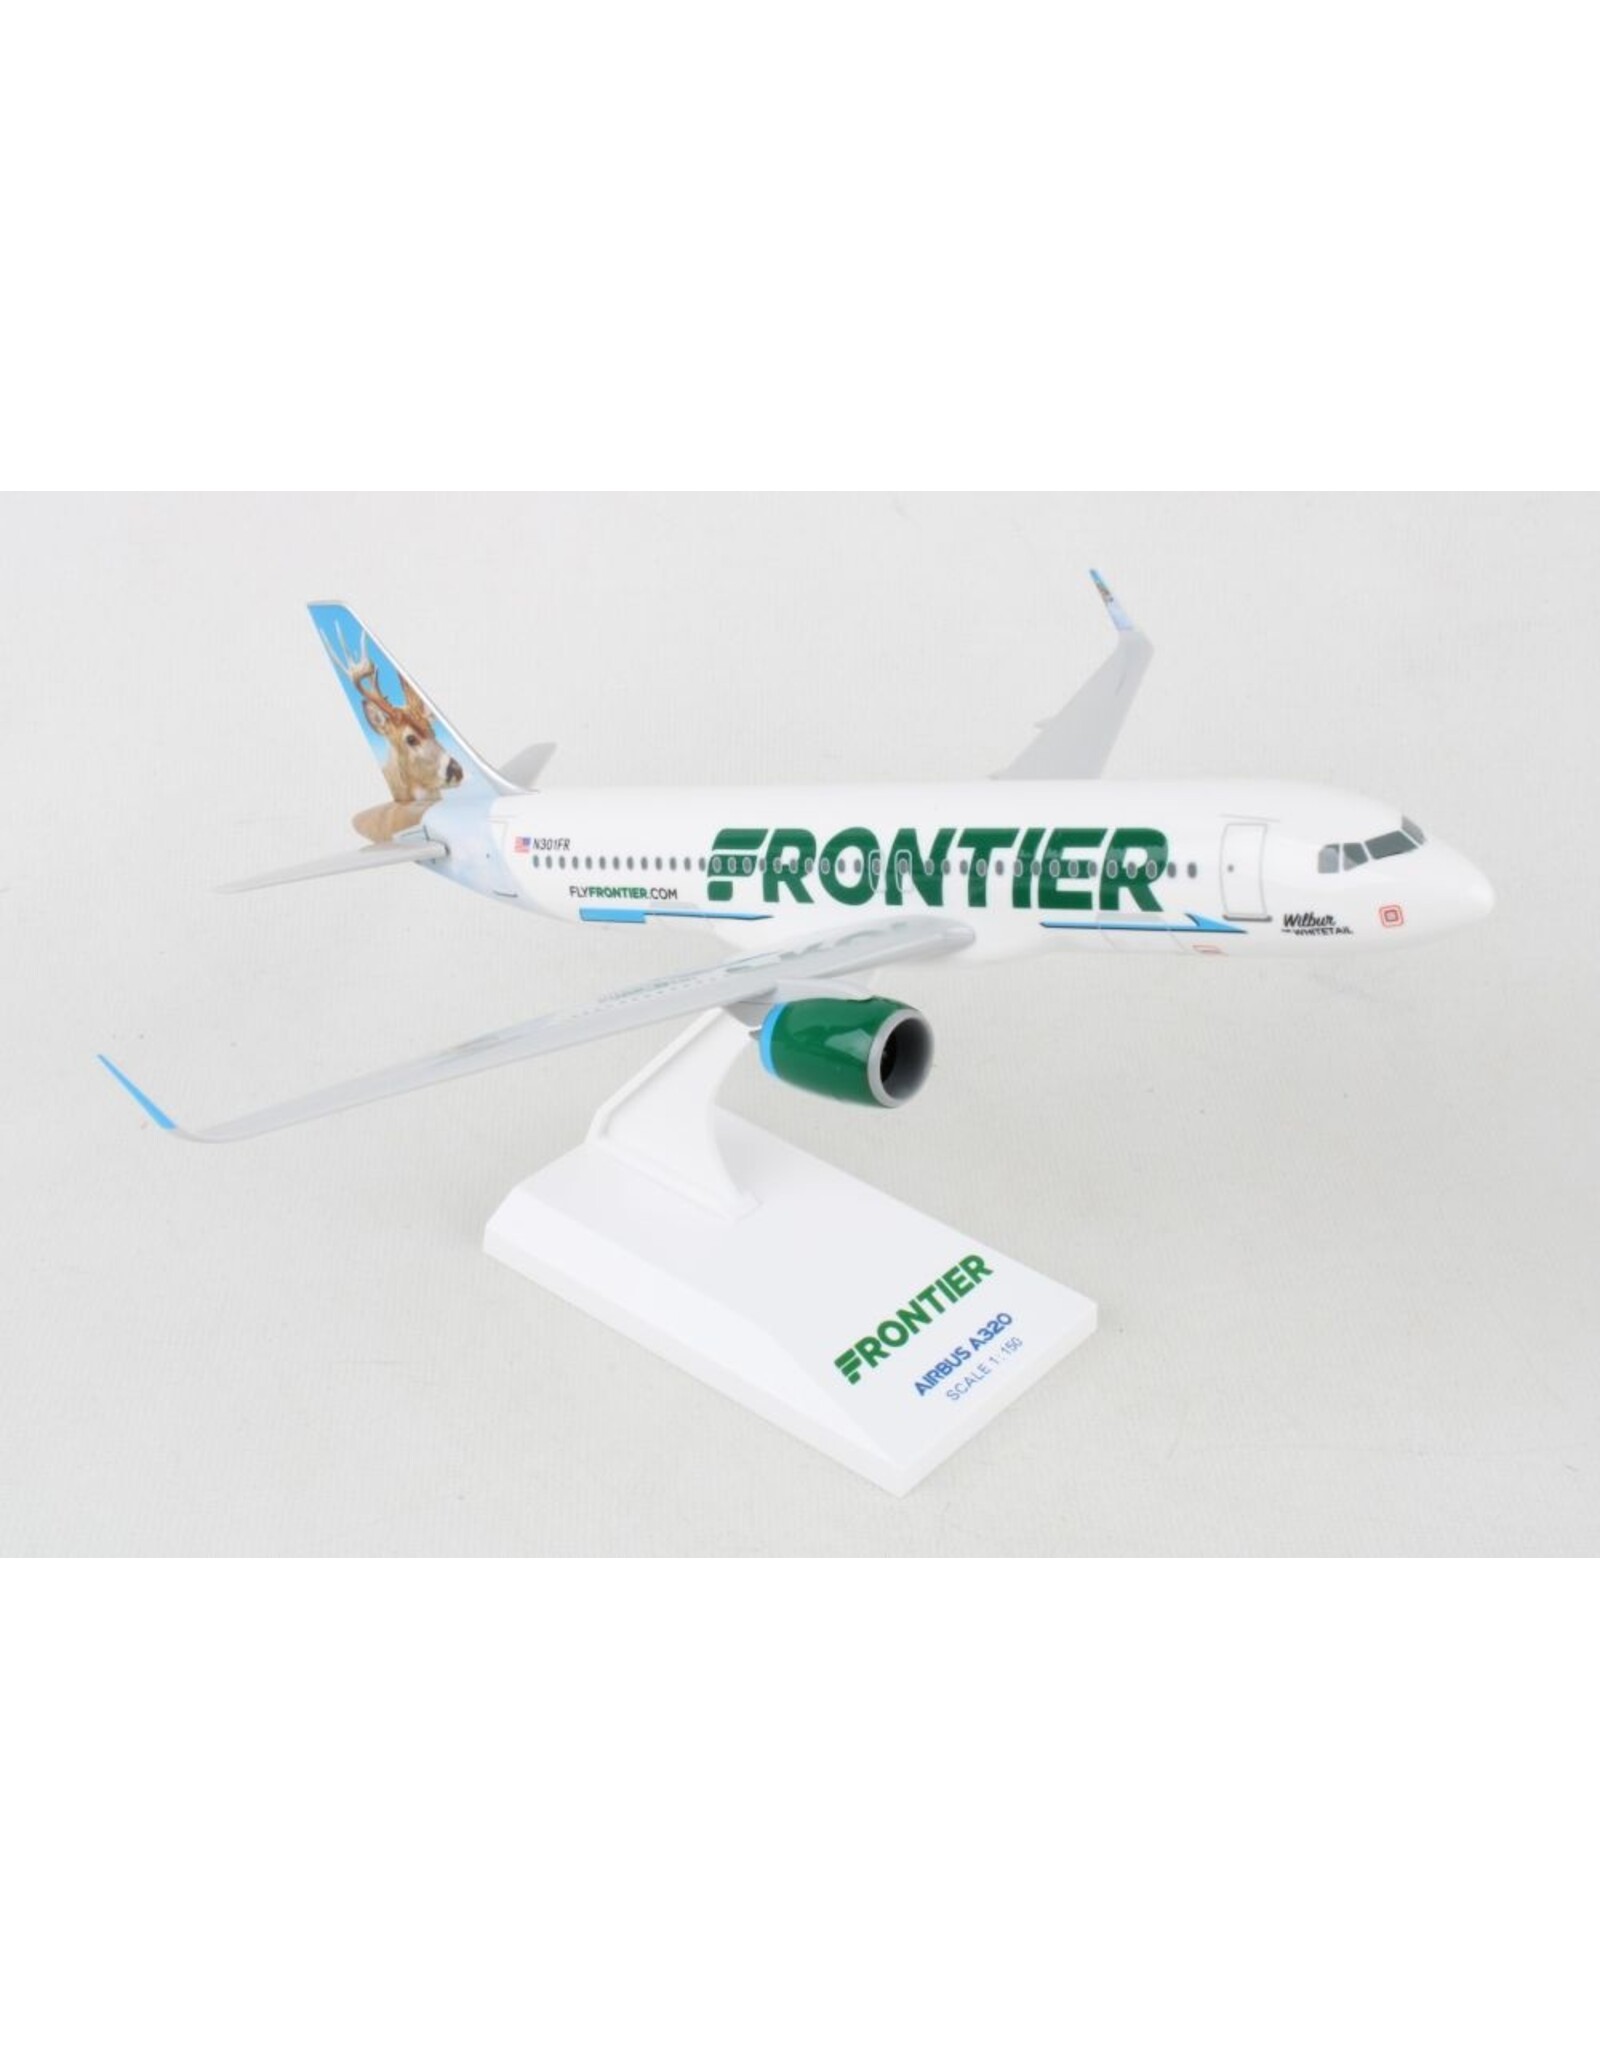 Skymarks Frontier A320neo 1/150